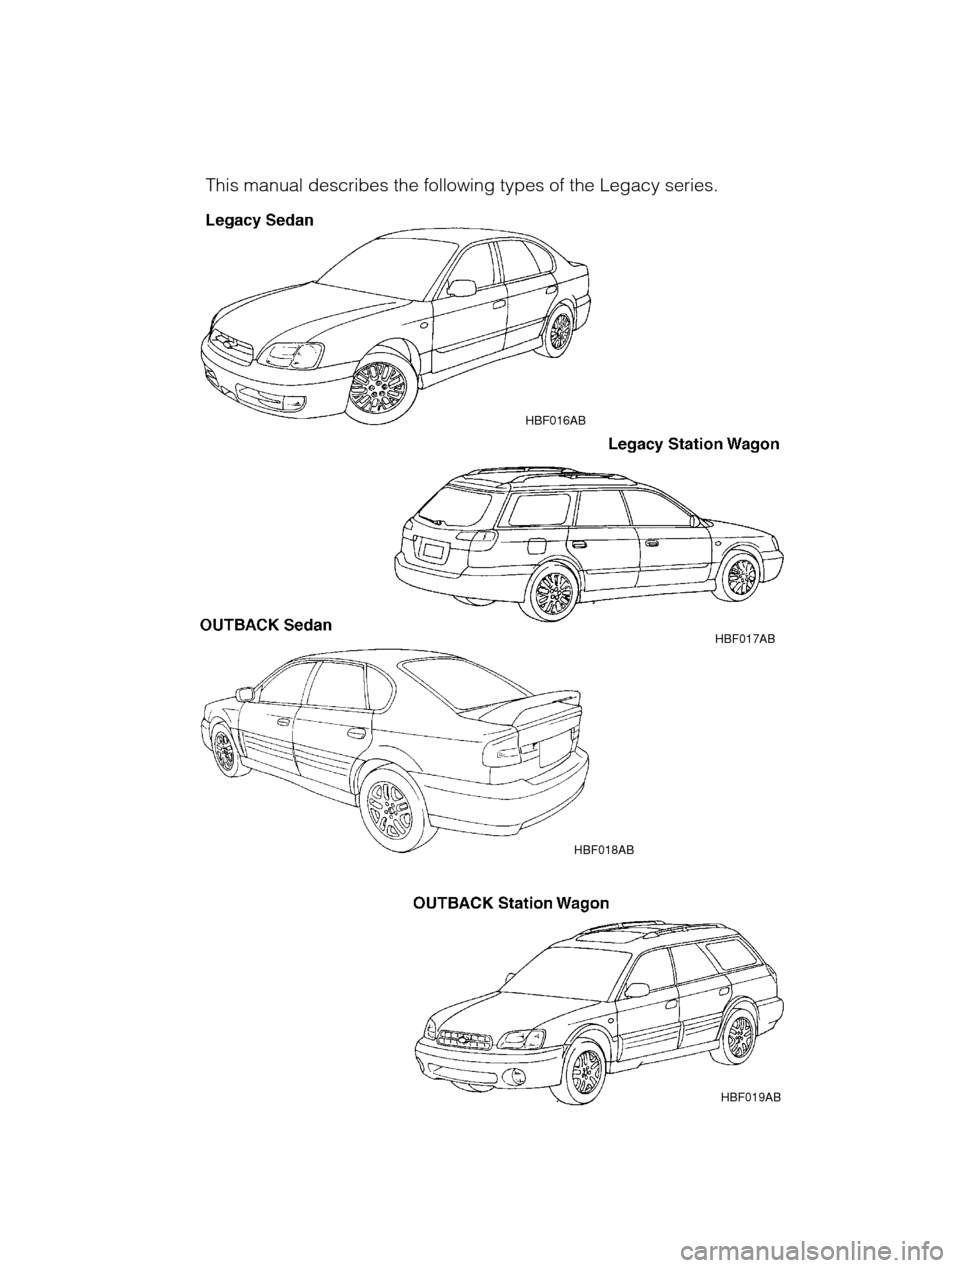 SUBARU OUTBACK 2002 3.G Owners Manual HBF016ABHBF017AB
This manual describes the following types of the Legacy series.
HBF019AB
HBF018AB       